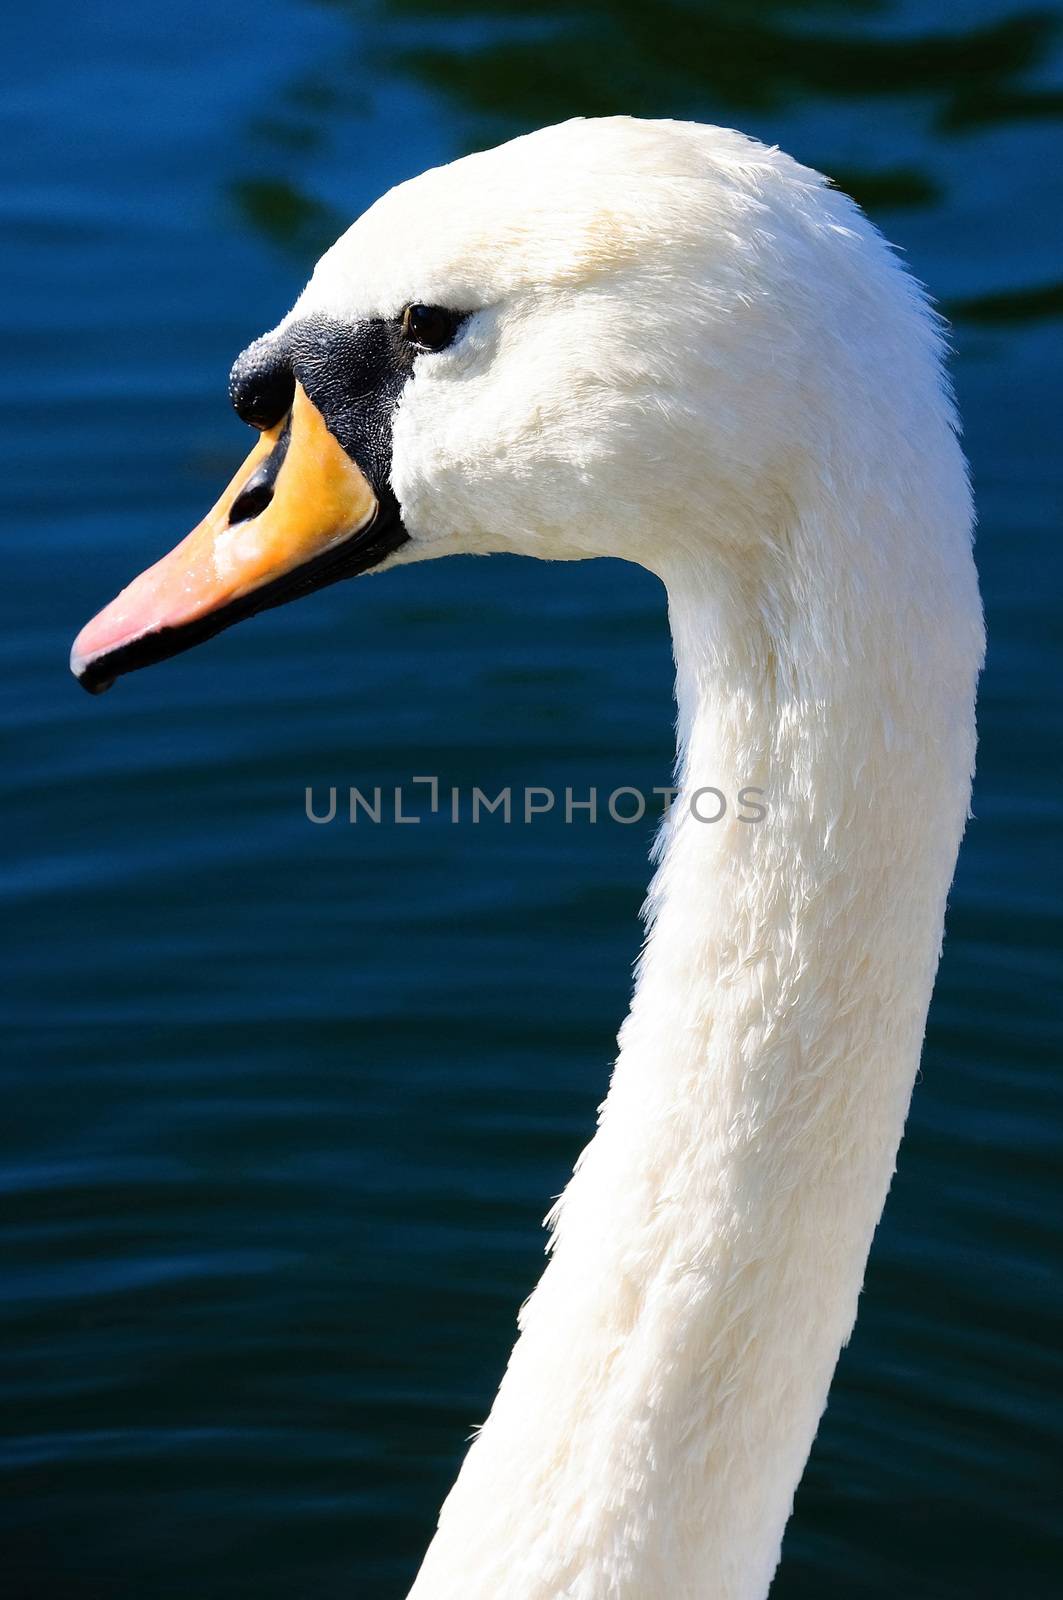 Head of a graceful white swan on lake water by Eagle2308